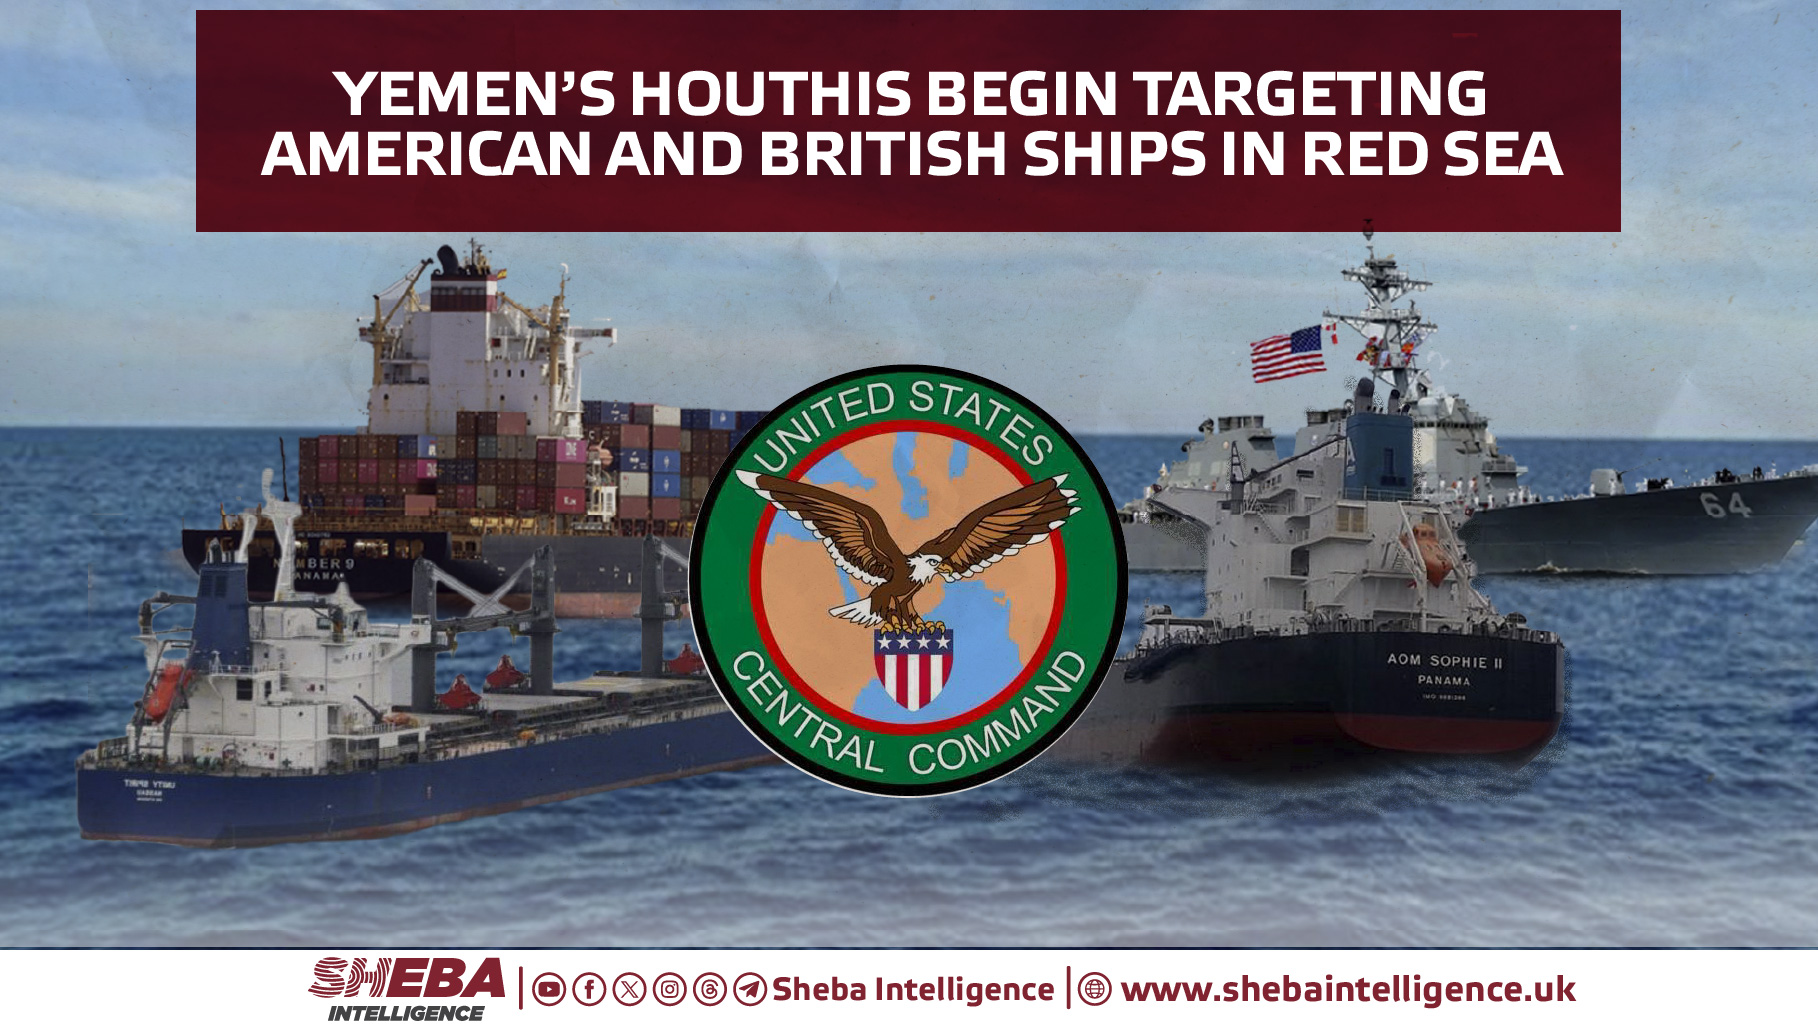 Yemen's Houthis Begin Targeting American and British Ships in Red Sea